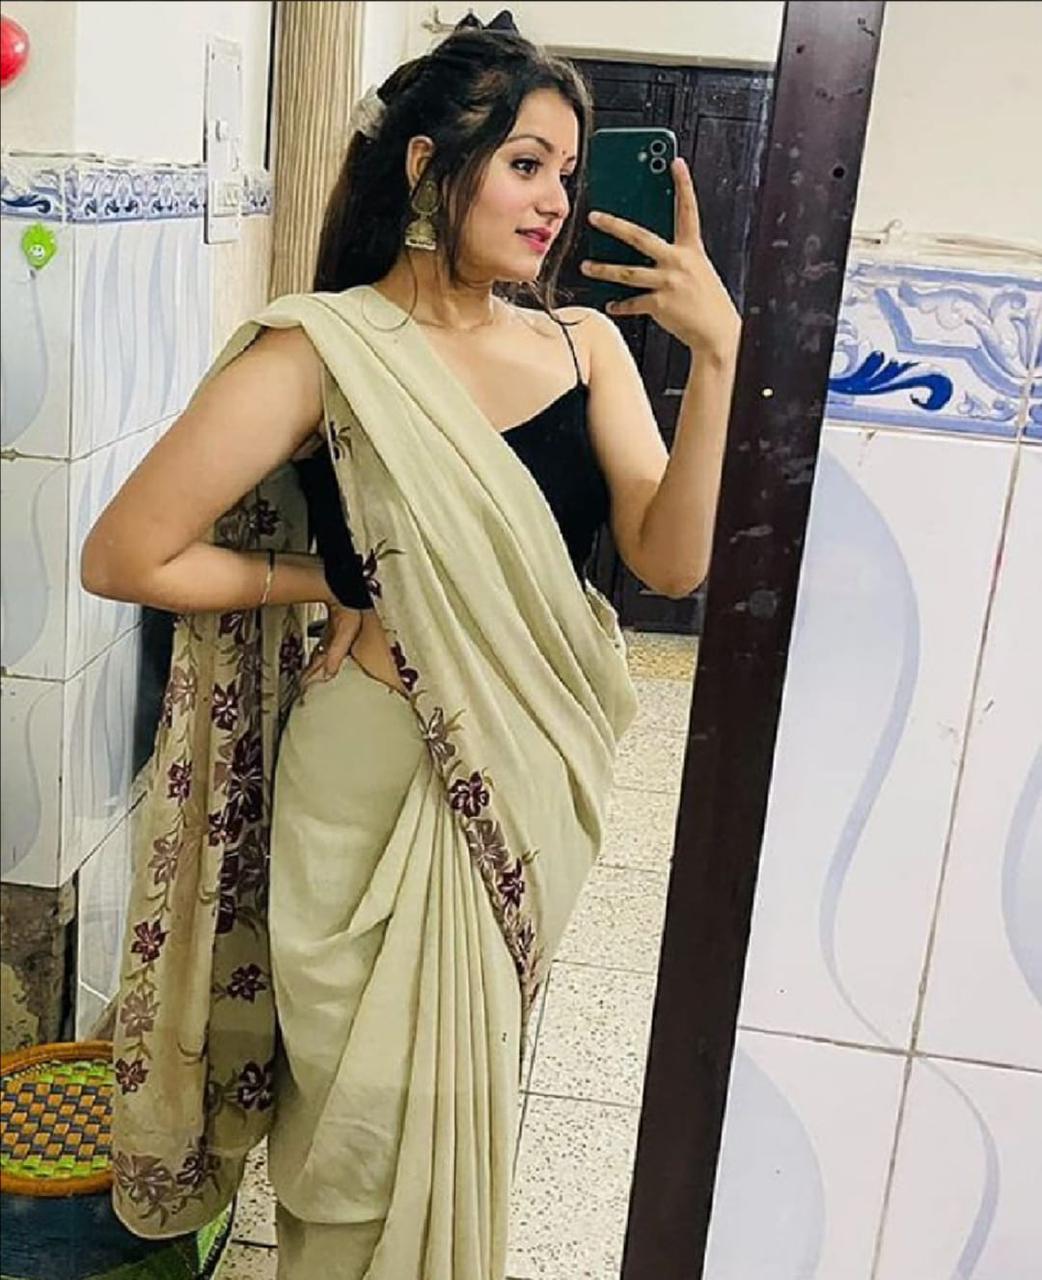 PATIALA🔥HOT&SEXY BEST VIP CALL GIRL AVAILABLE SAFE HOTEL&HOME